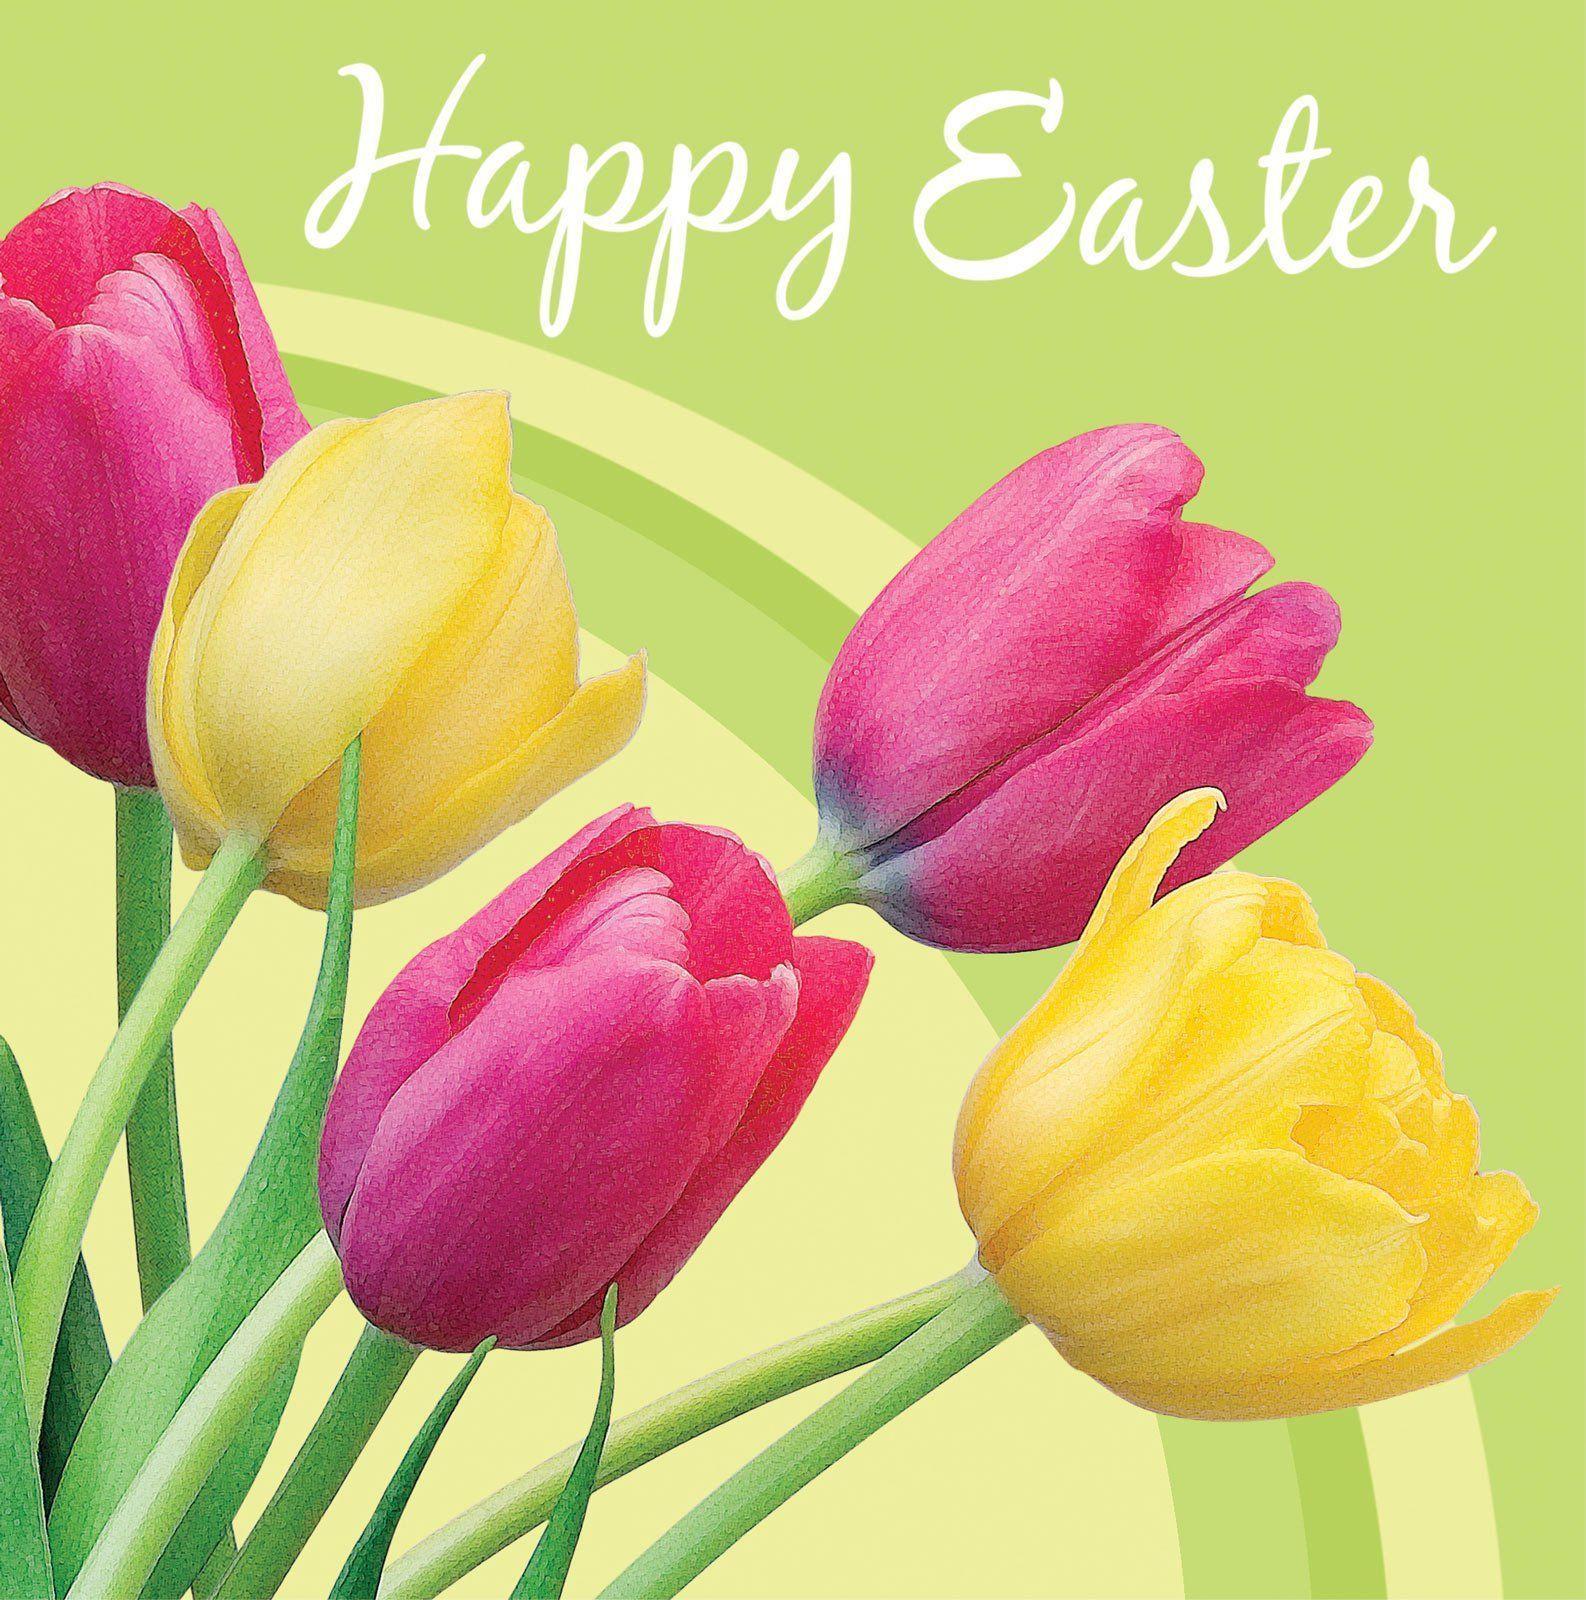 Most Beautiful Happy Easter Wallpaper. Cool Christian Wallpaper